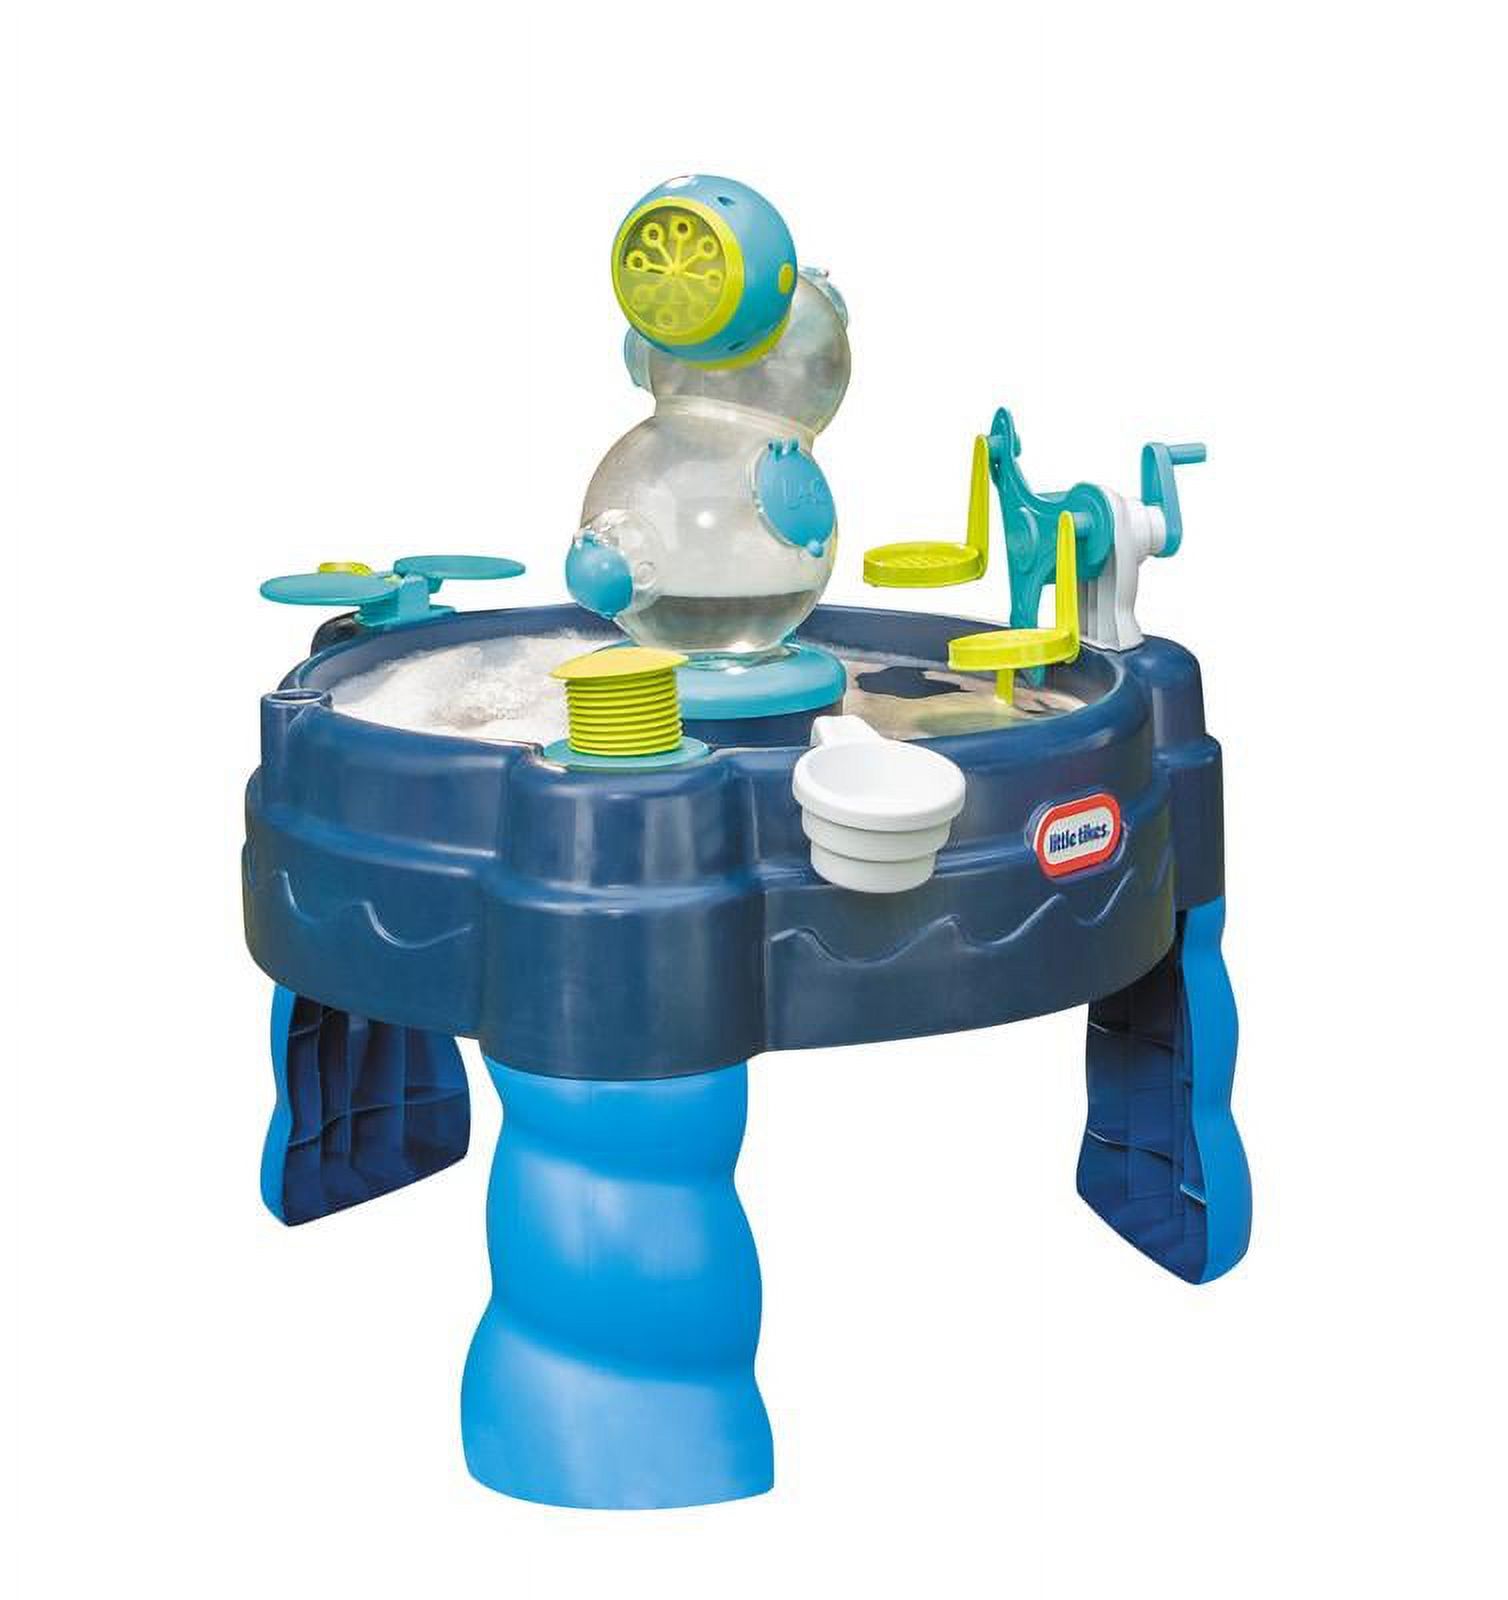 Little Tikes FOAMO 3-in-1 Water Table with Bubble & Foam Machine Activity and Accessory Set, Outdoor Water Toy Play Set for Toddlers Kids Boys Girls Ages 2 3 4+ Year Old - image 1 of 6